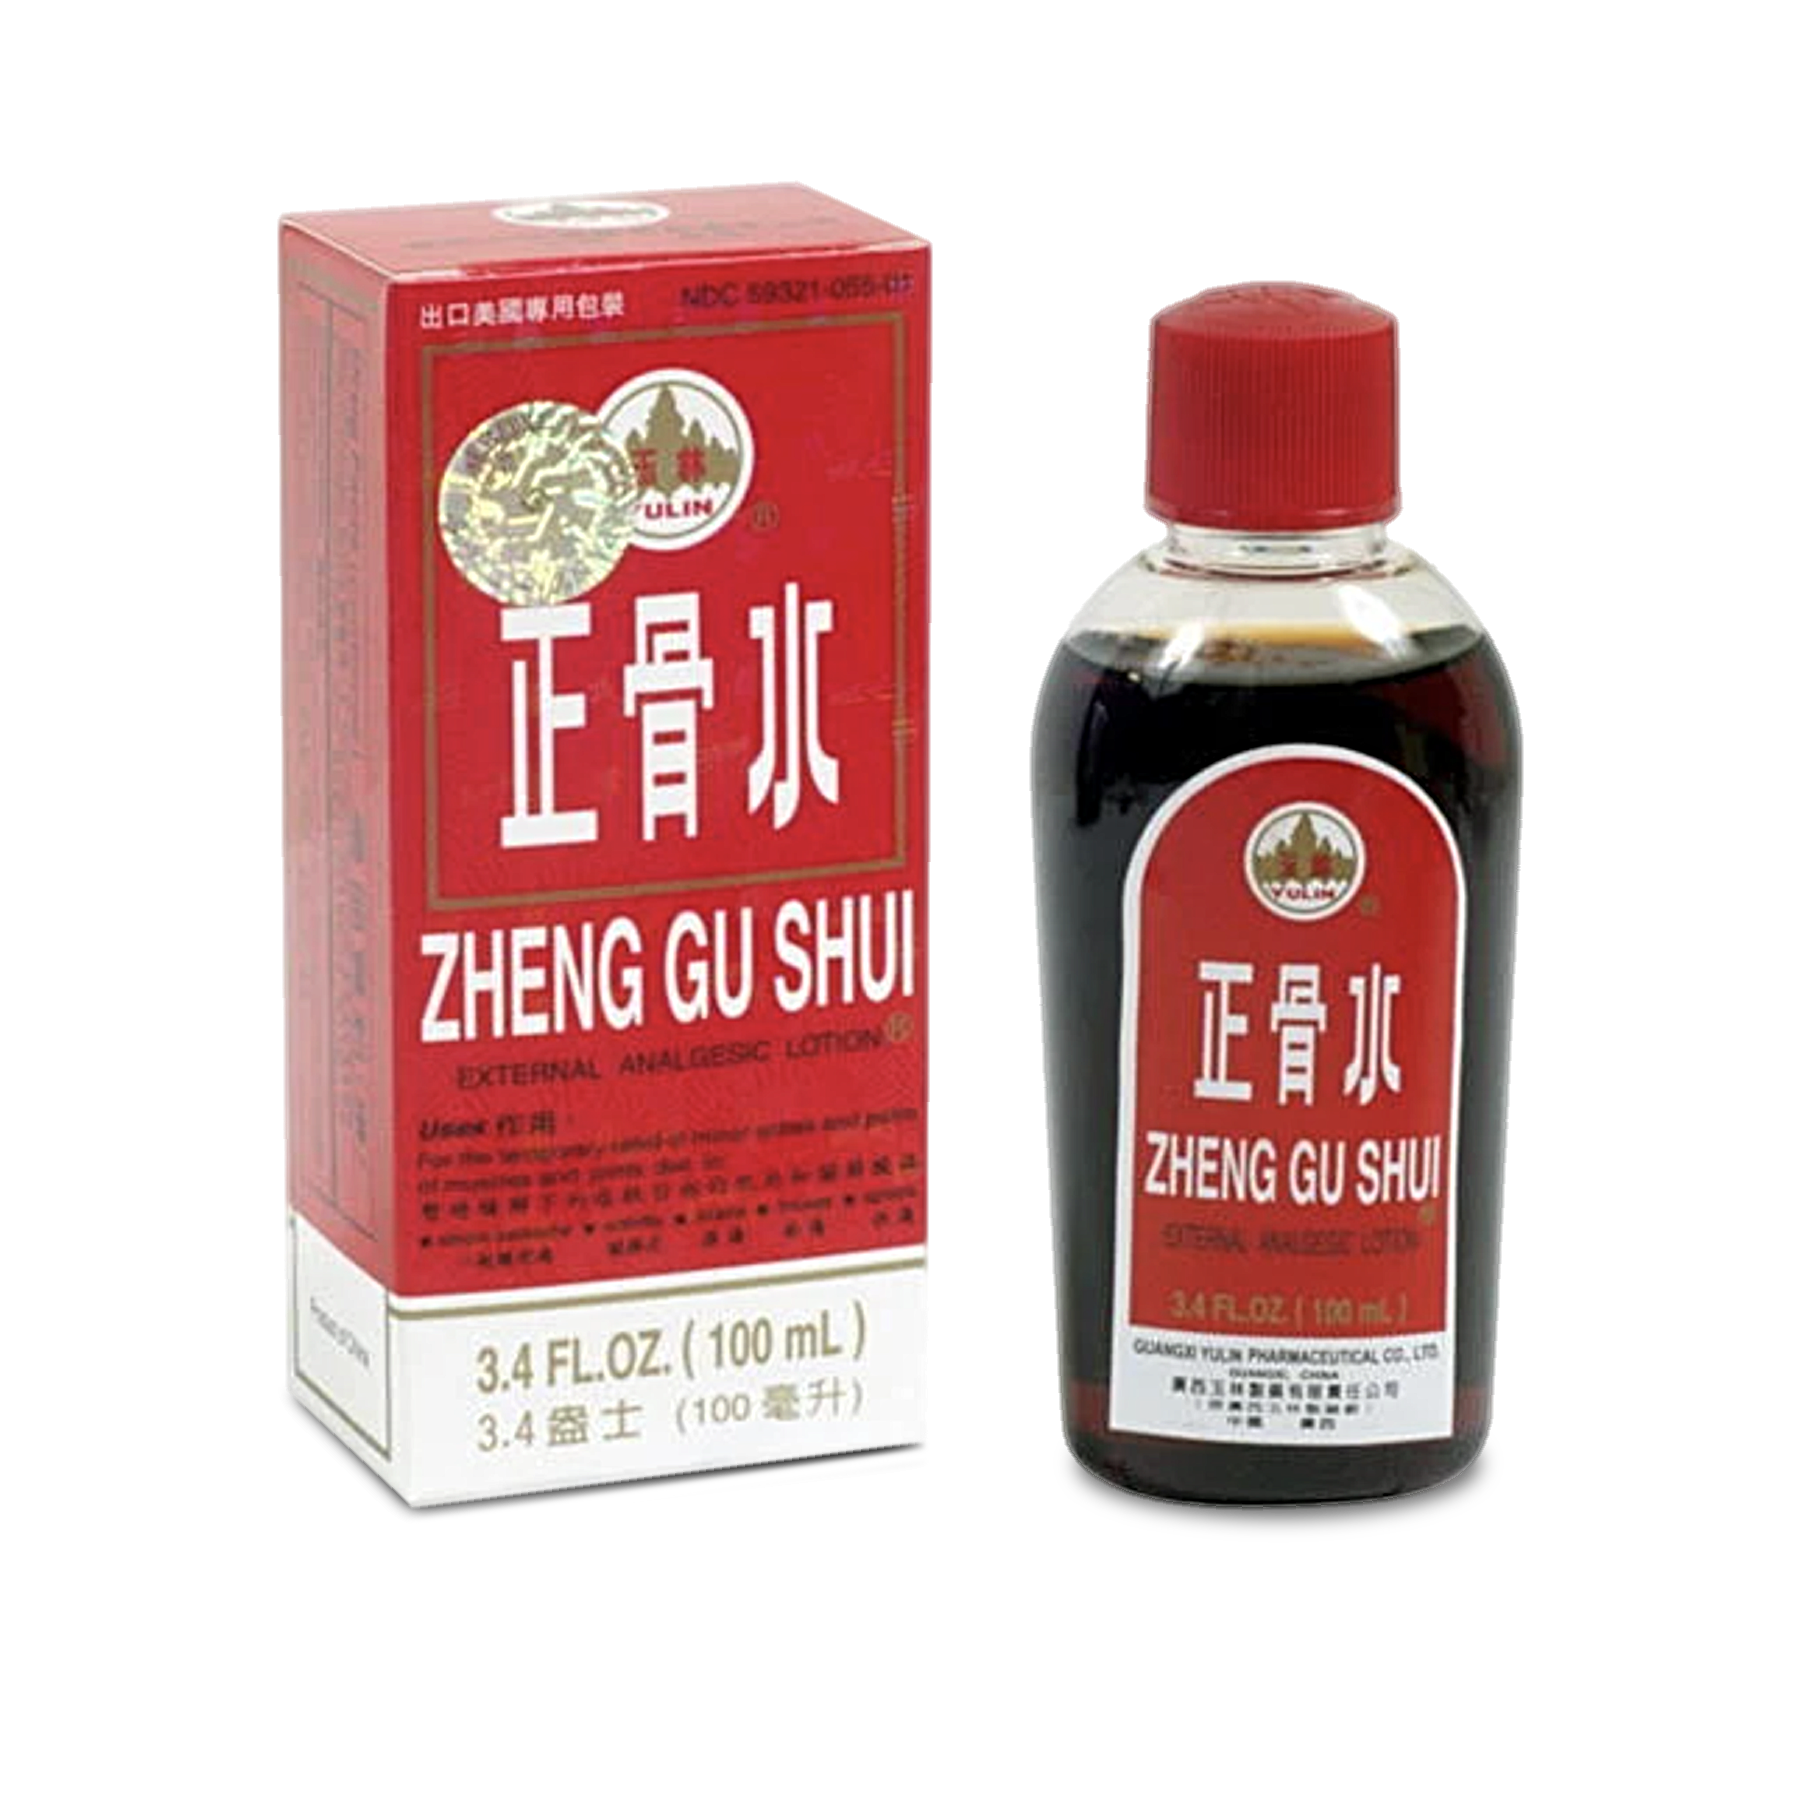 Zheng Gu Shui is a topical that may aid in increasing circulation topically, to the injured areas and help heal and reduce pain.